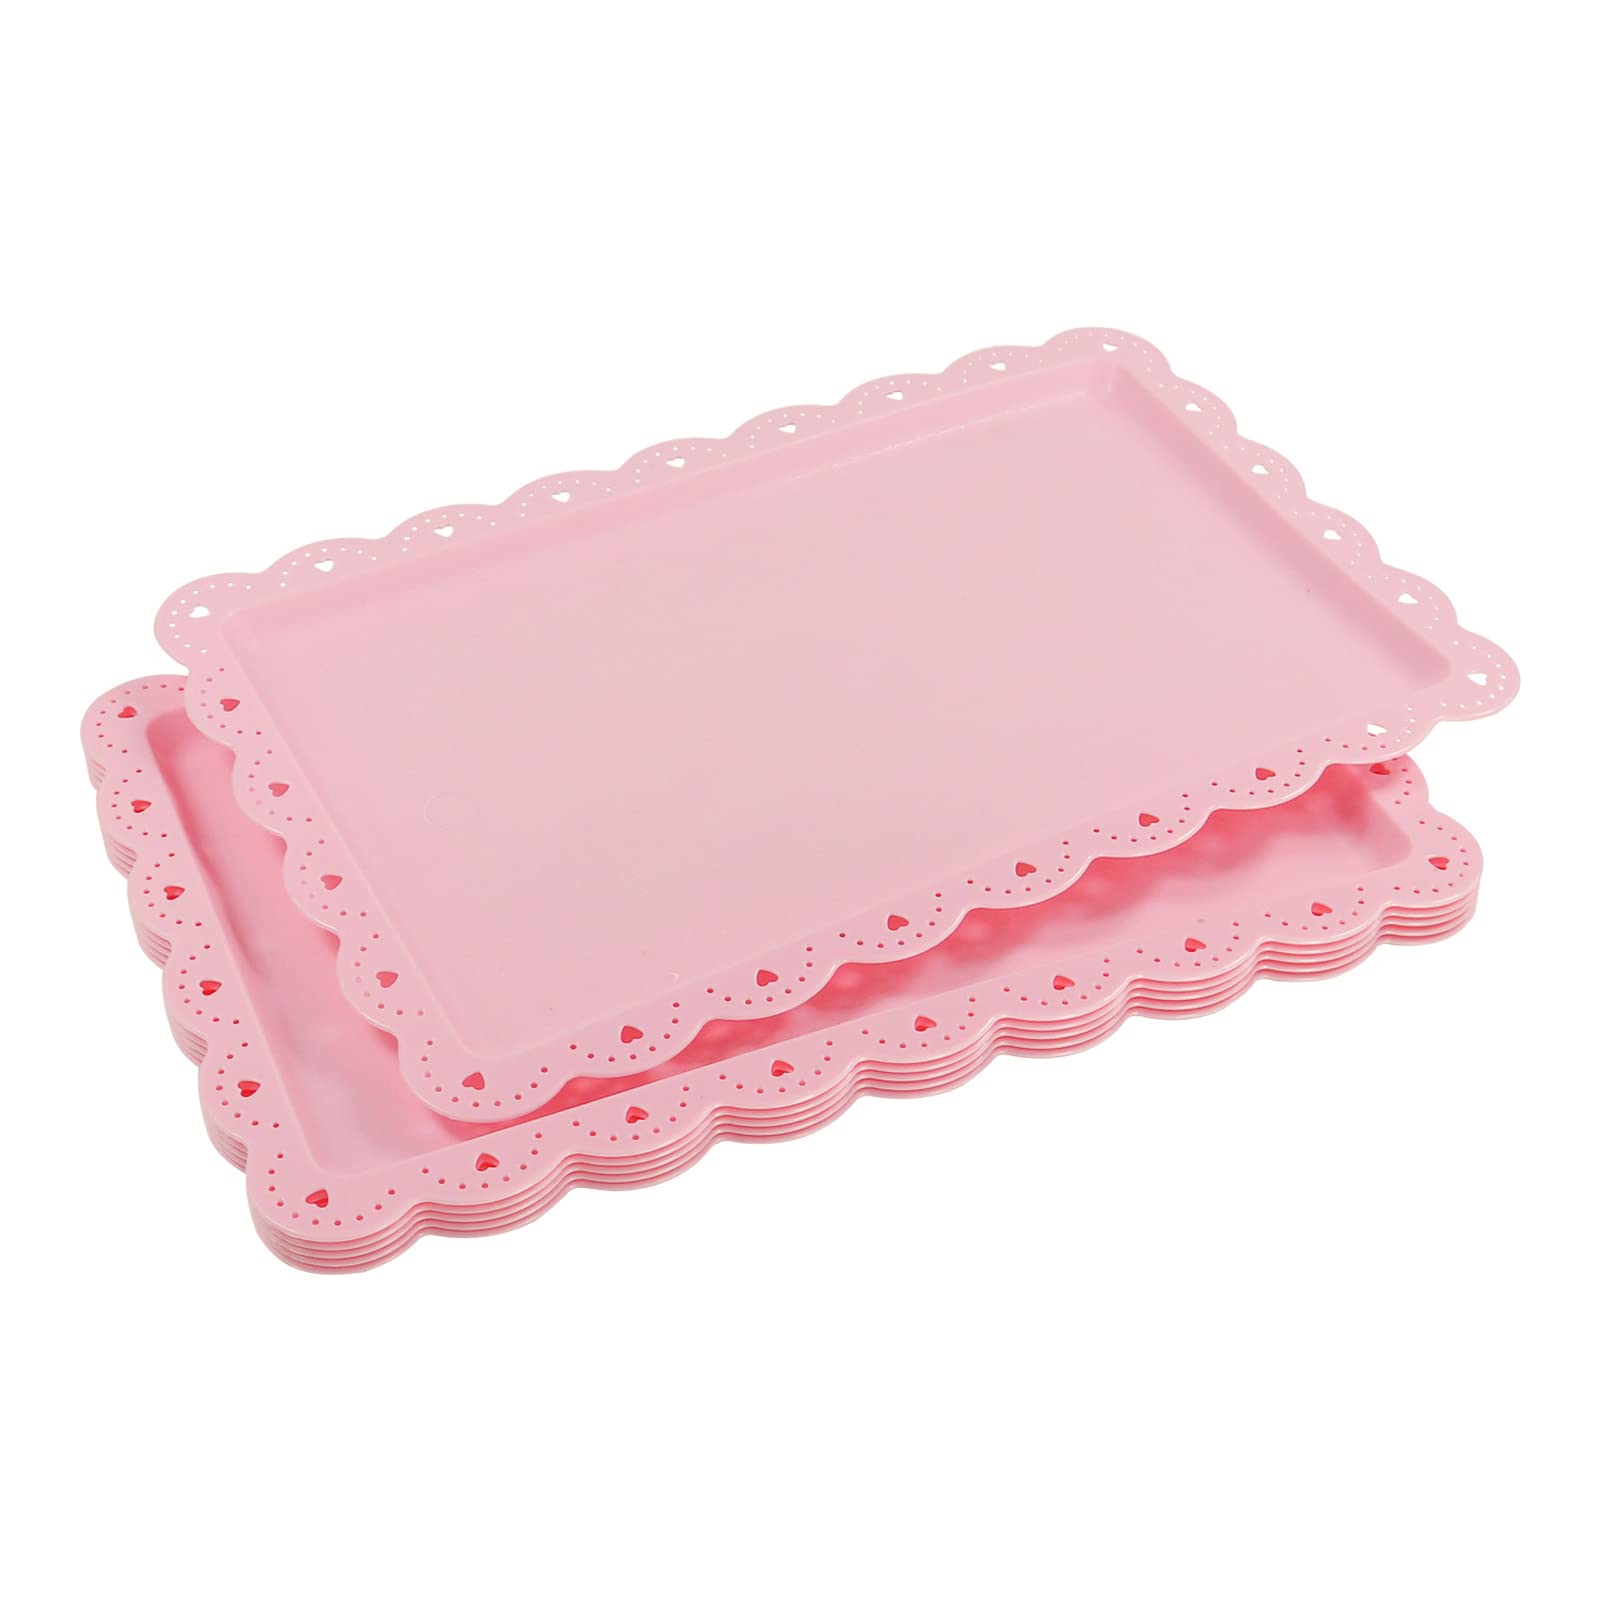 10 Pcs Pink Plastic Cake Stand, 4 Pcs 3 Tier Dessert Display Stands Cookie Tray Rack Serving Tray Cake Display Tower and 6 Pcs Dessert Trays for Wedding Baby Shower Tea Party (Pink)